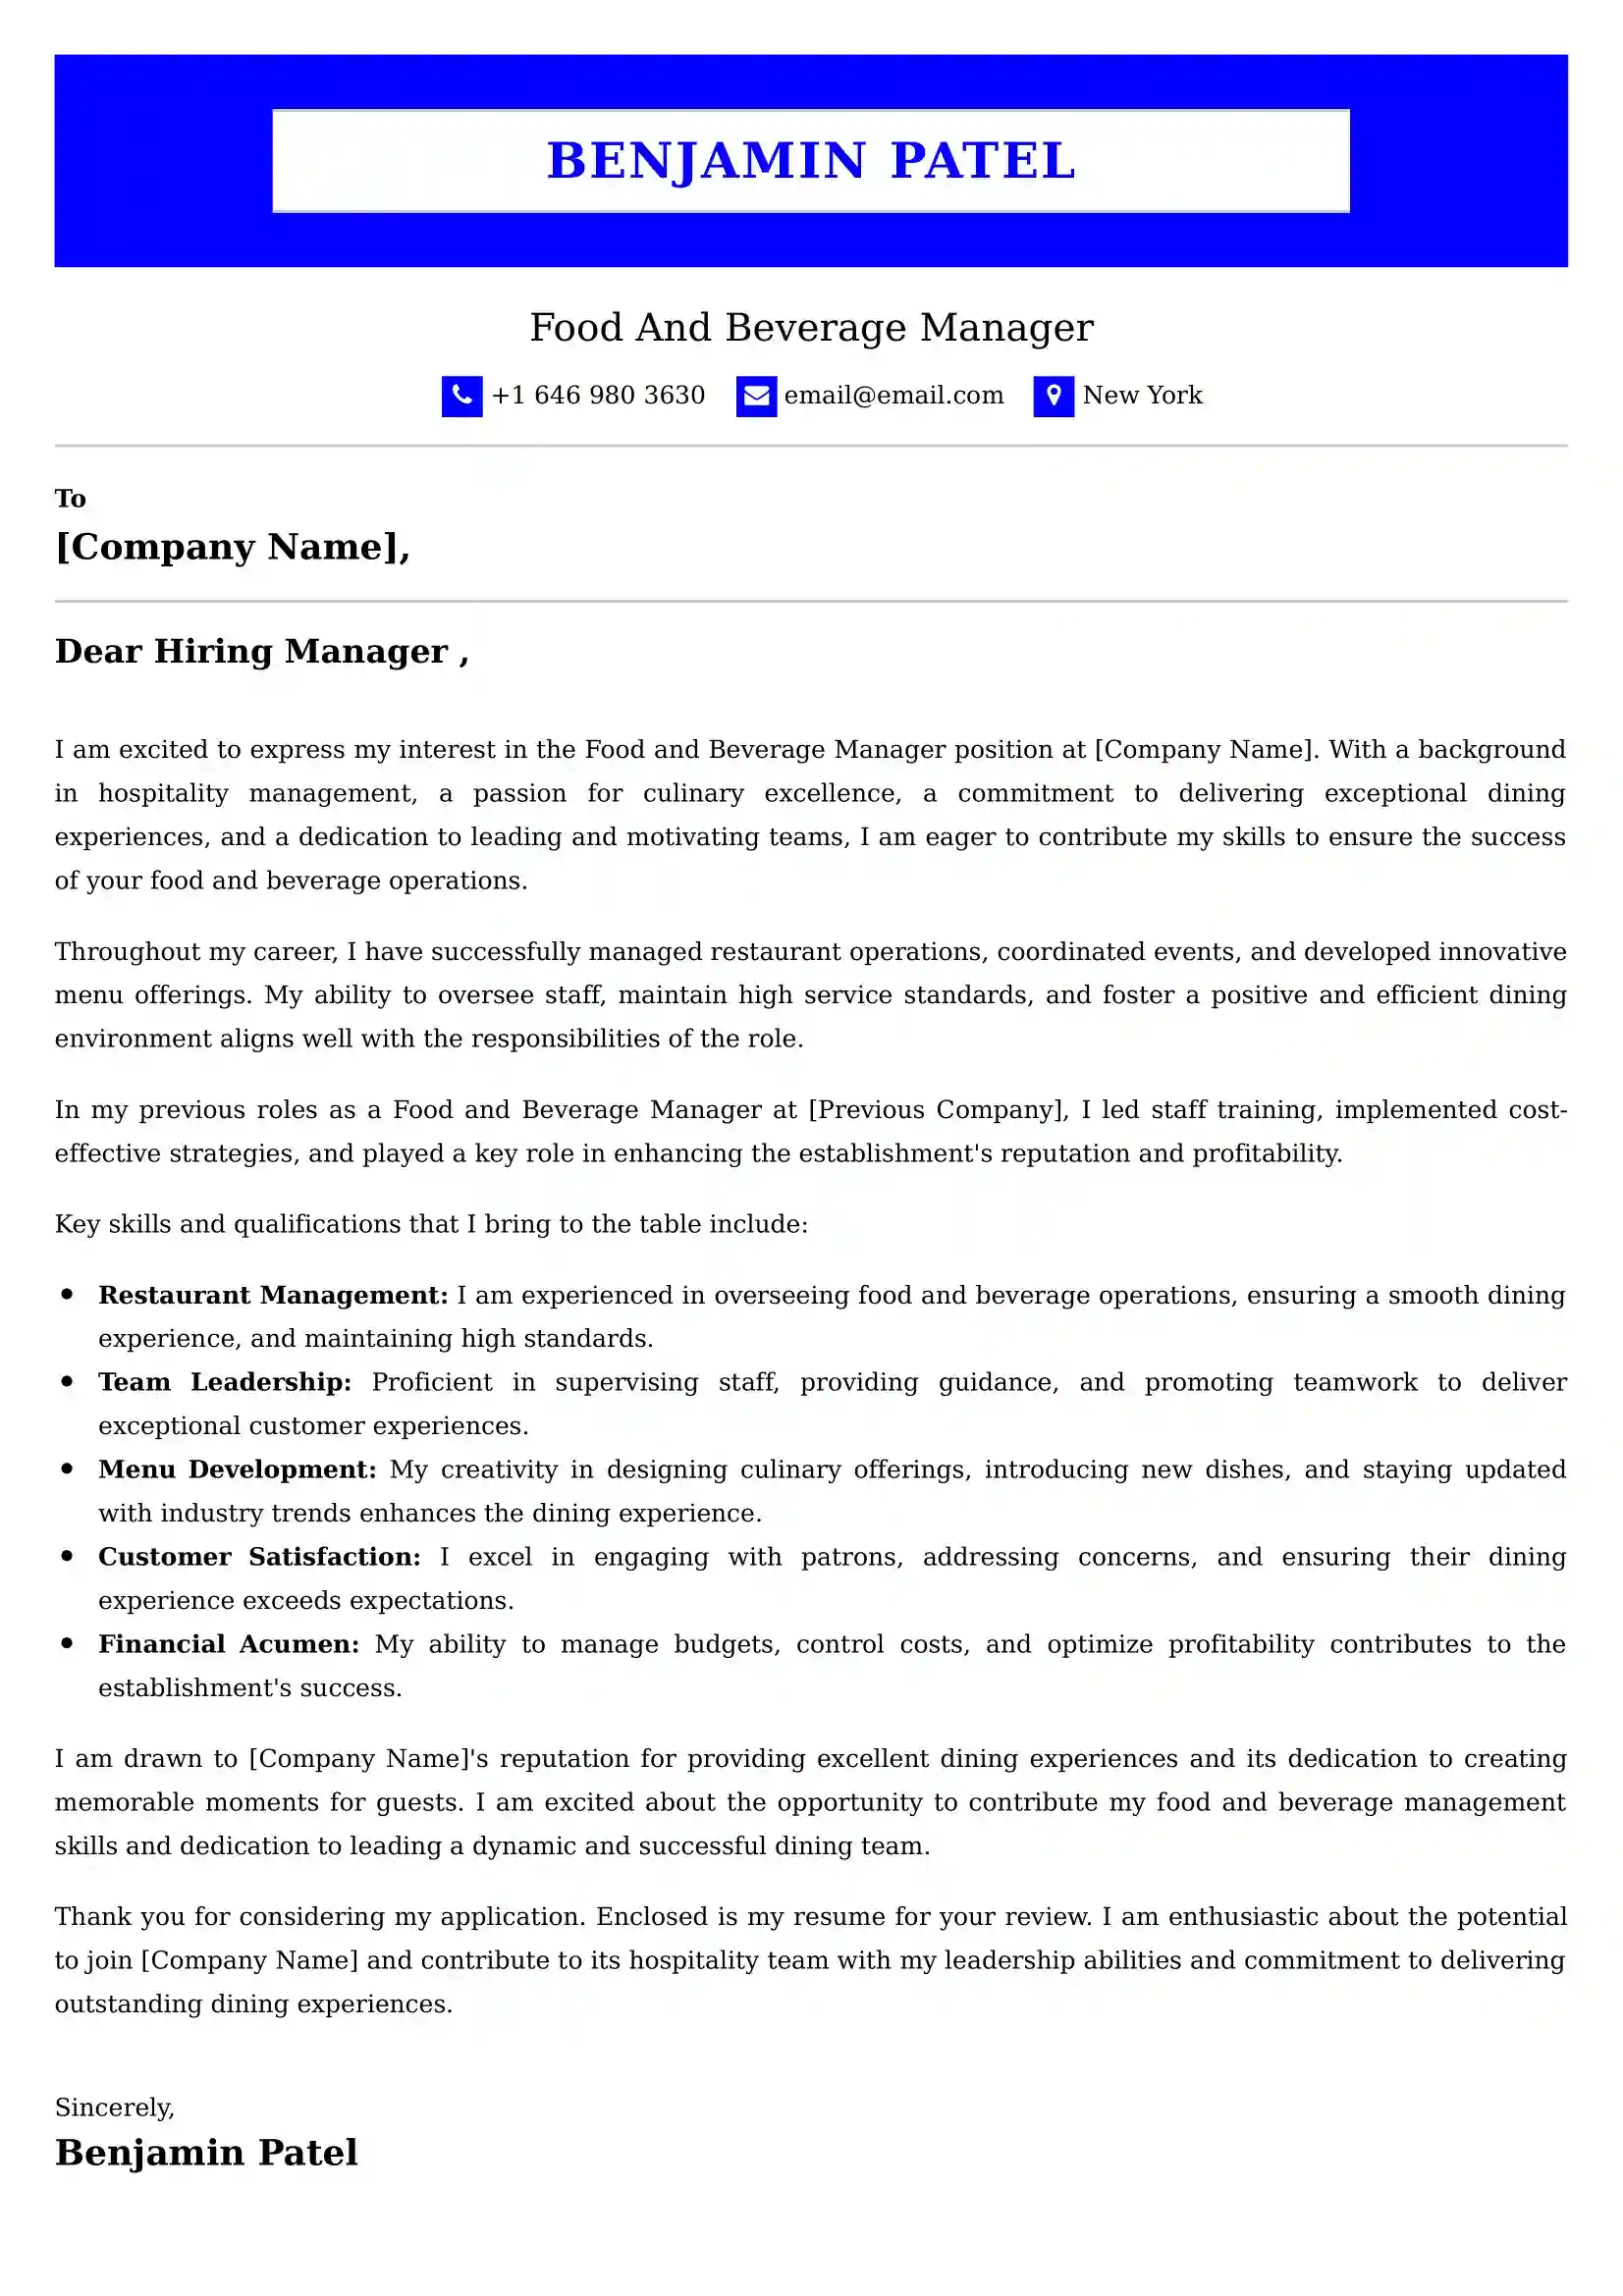 Food And Beverage Manager Cover Letter Examples for UAE 